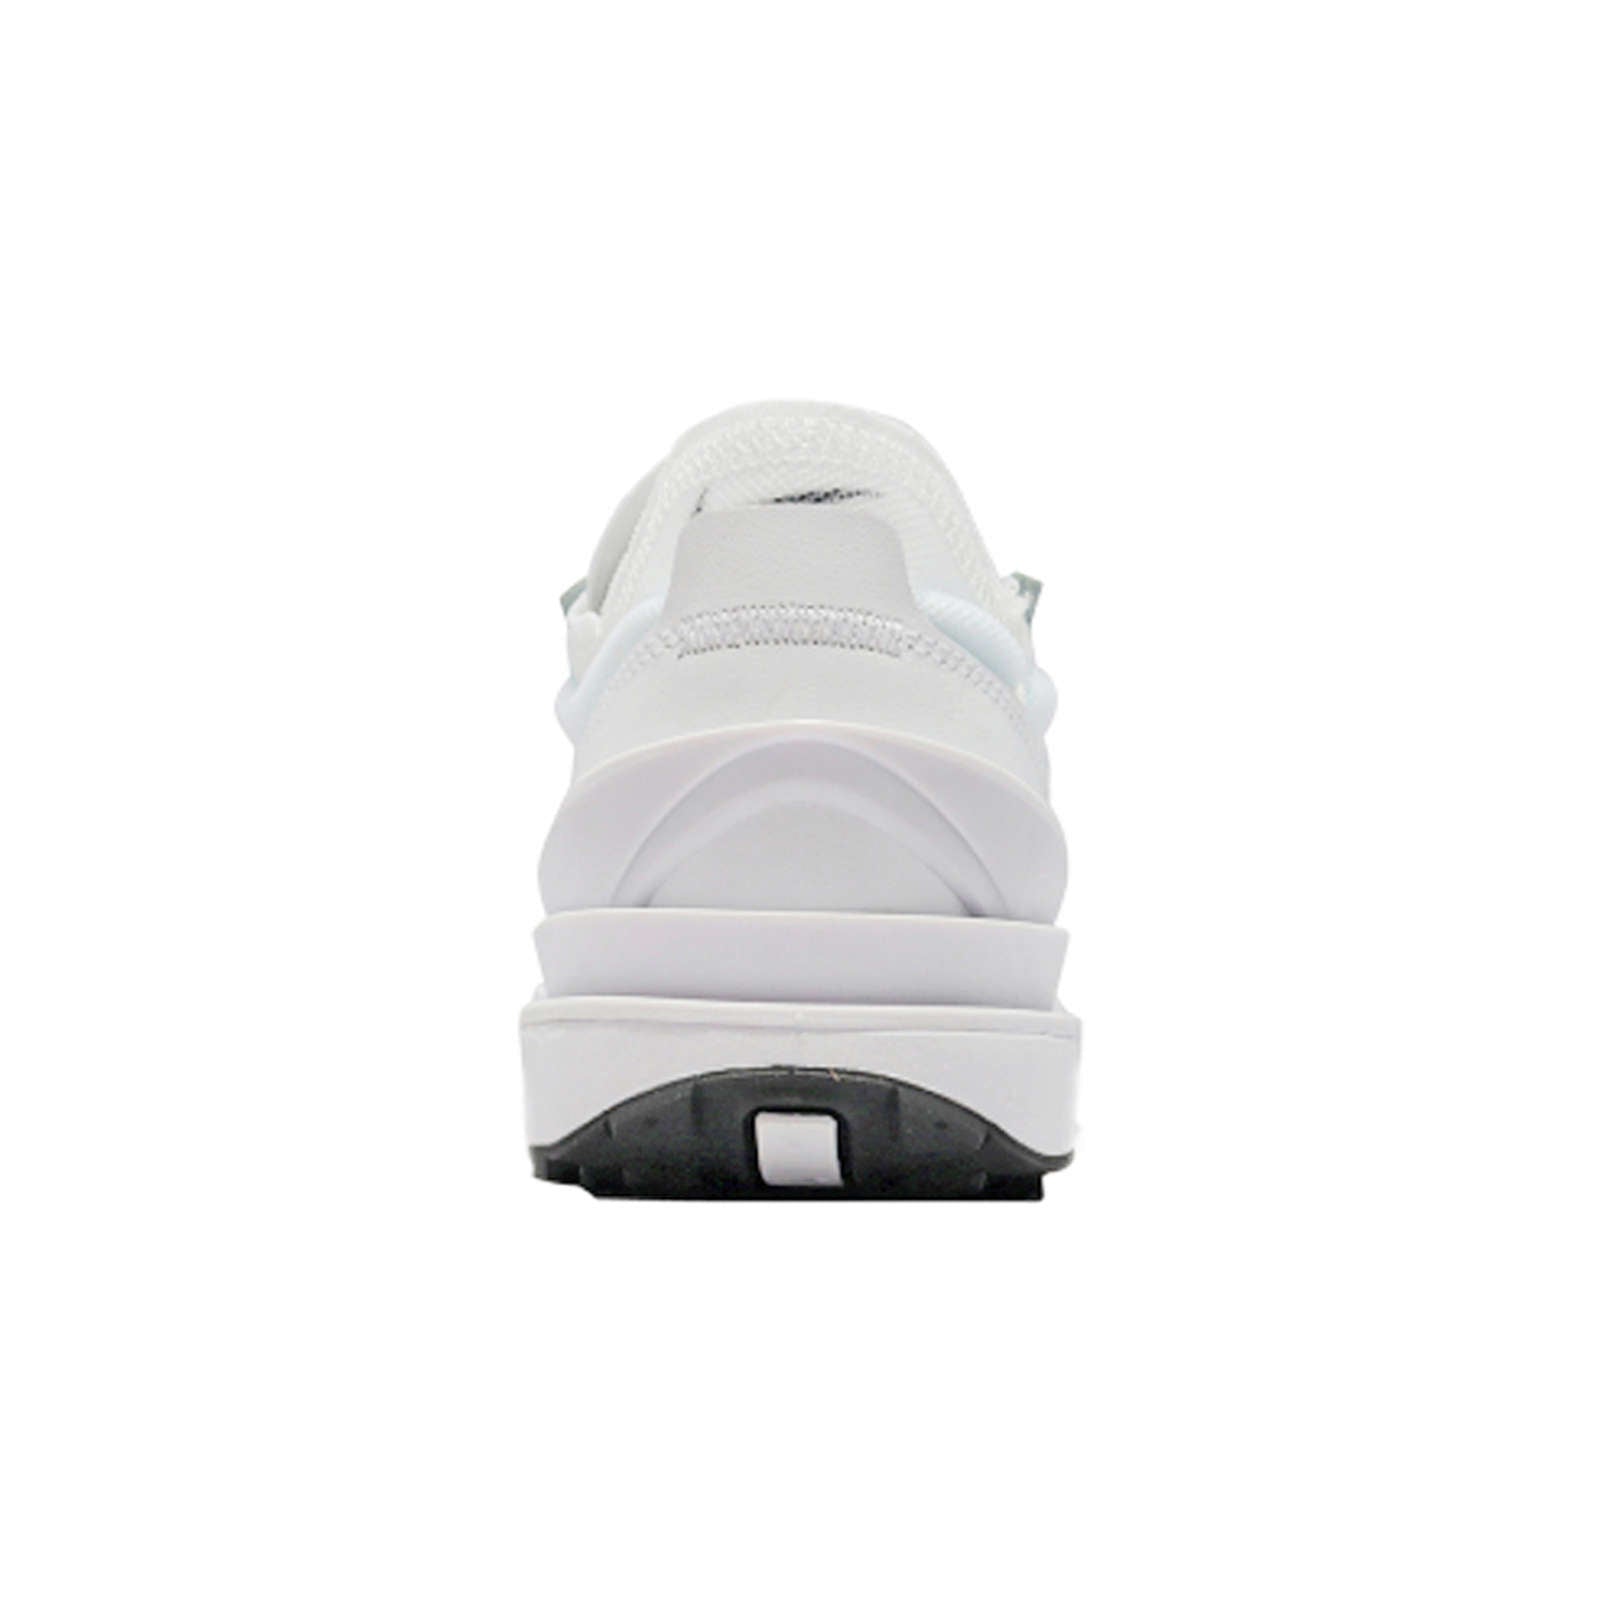 Nike Waffle One Leather Textile Women's Low-Top Trainers#color_white white black